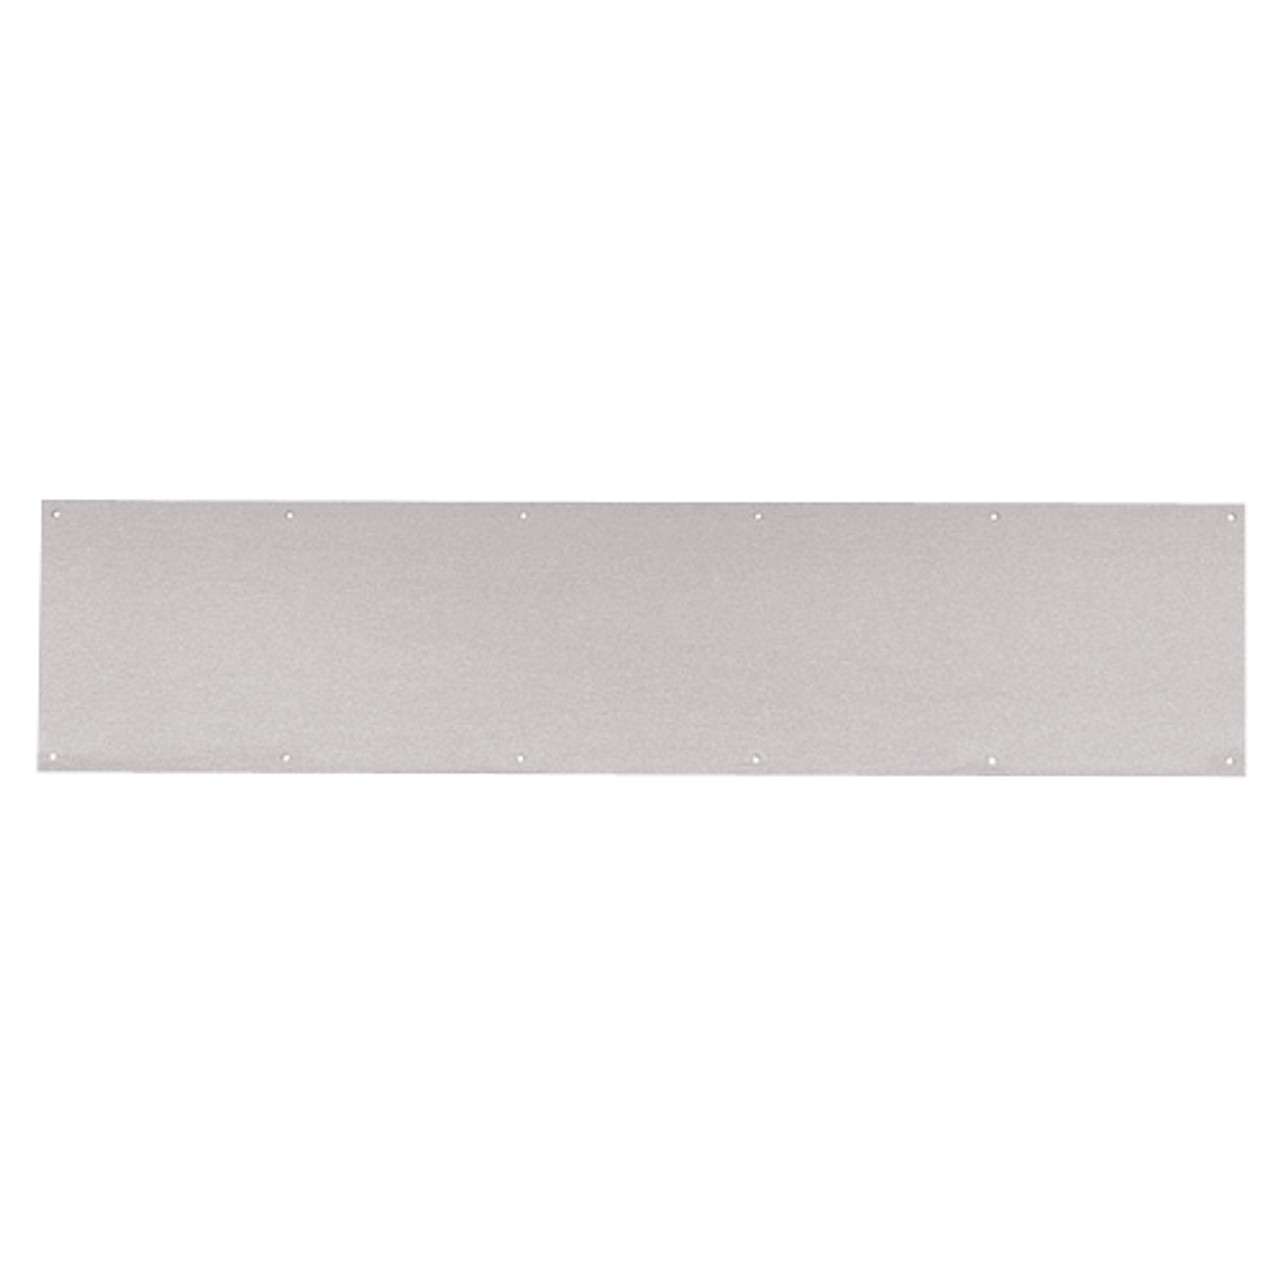 8400-US32D-33x46-B-CS Ives 8400 Series Protection Plate in Satin Stainless Steel